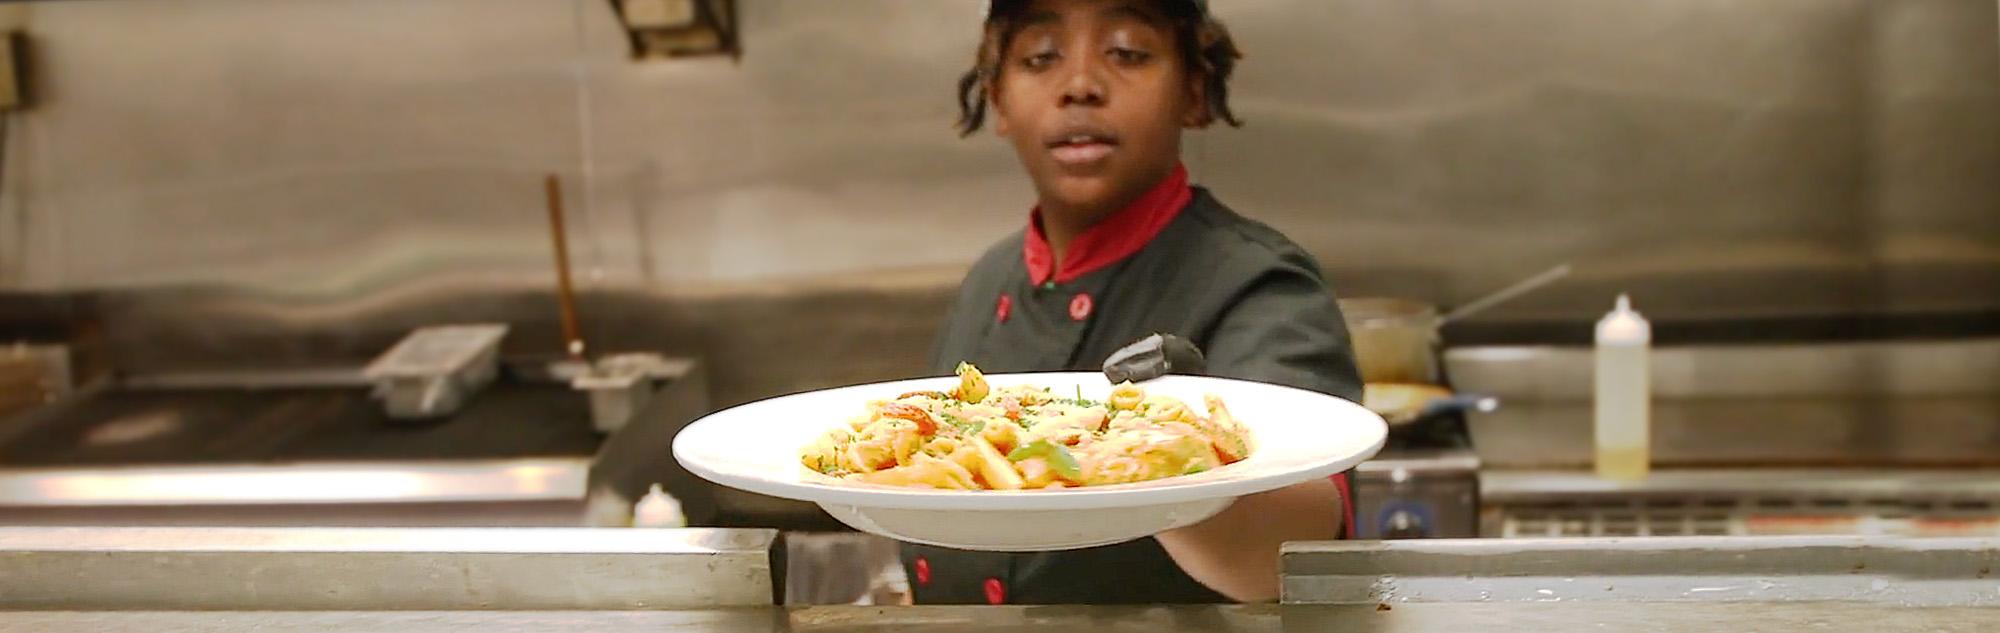 Chef hands plate of pasta from kitchen to server.